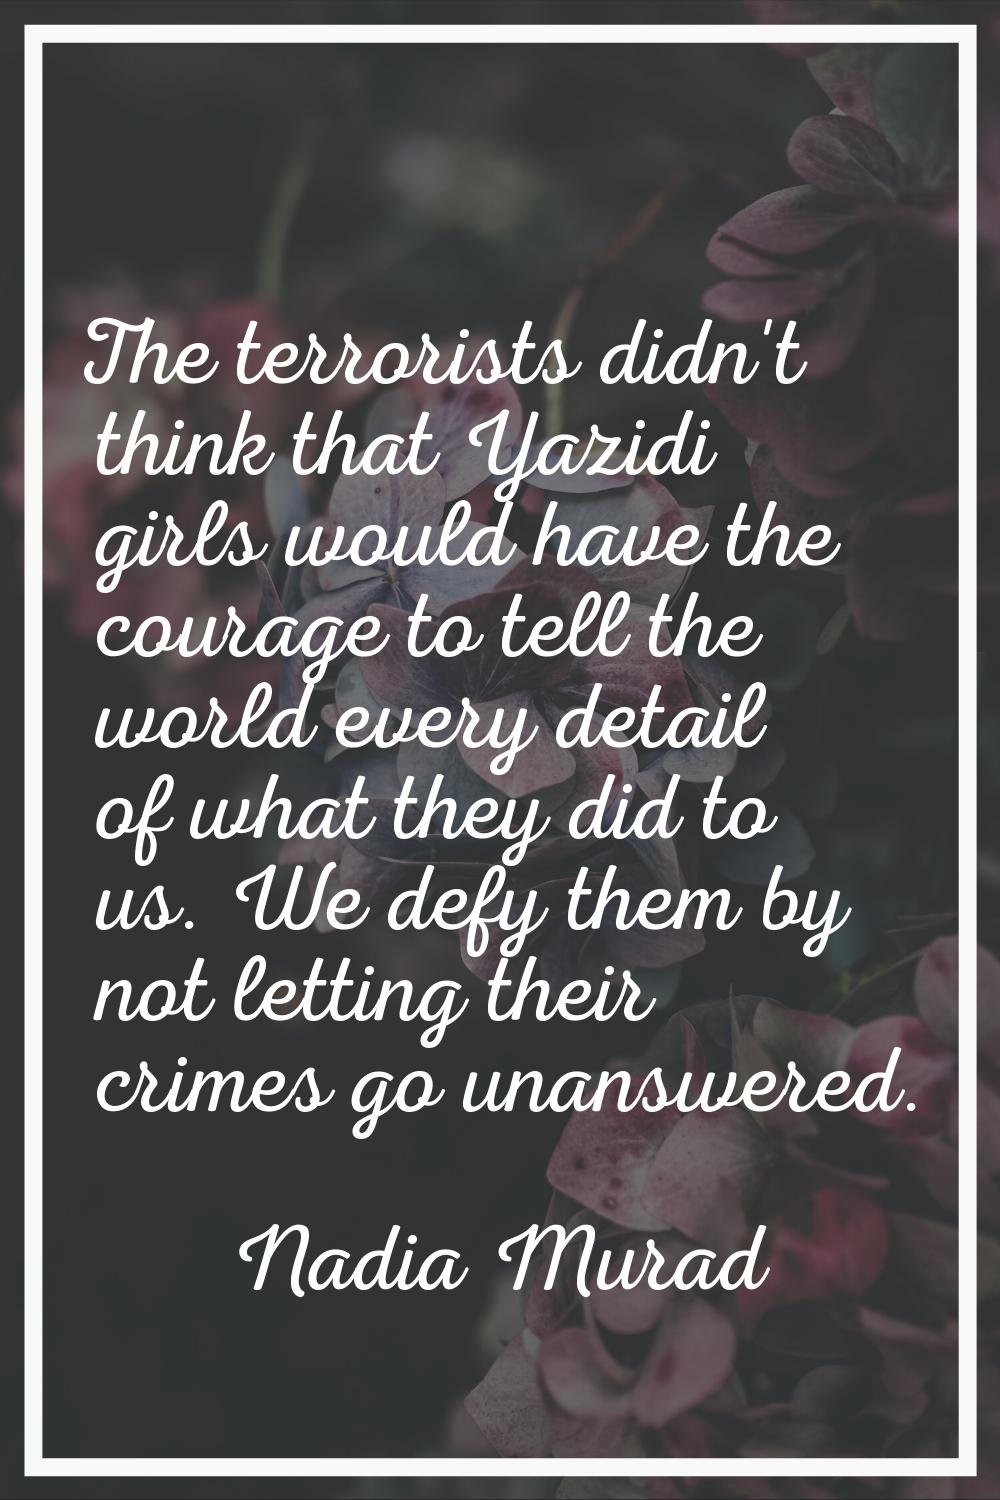 The terrorists didn't think that Yazidi girls would have the courage to tell the world every detail